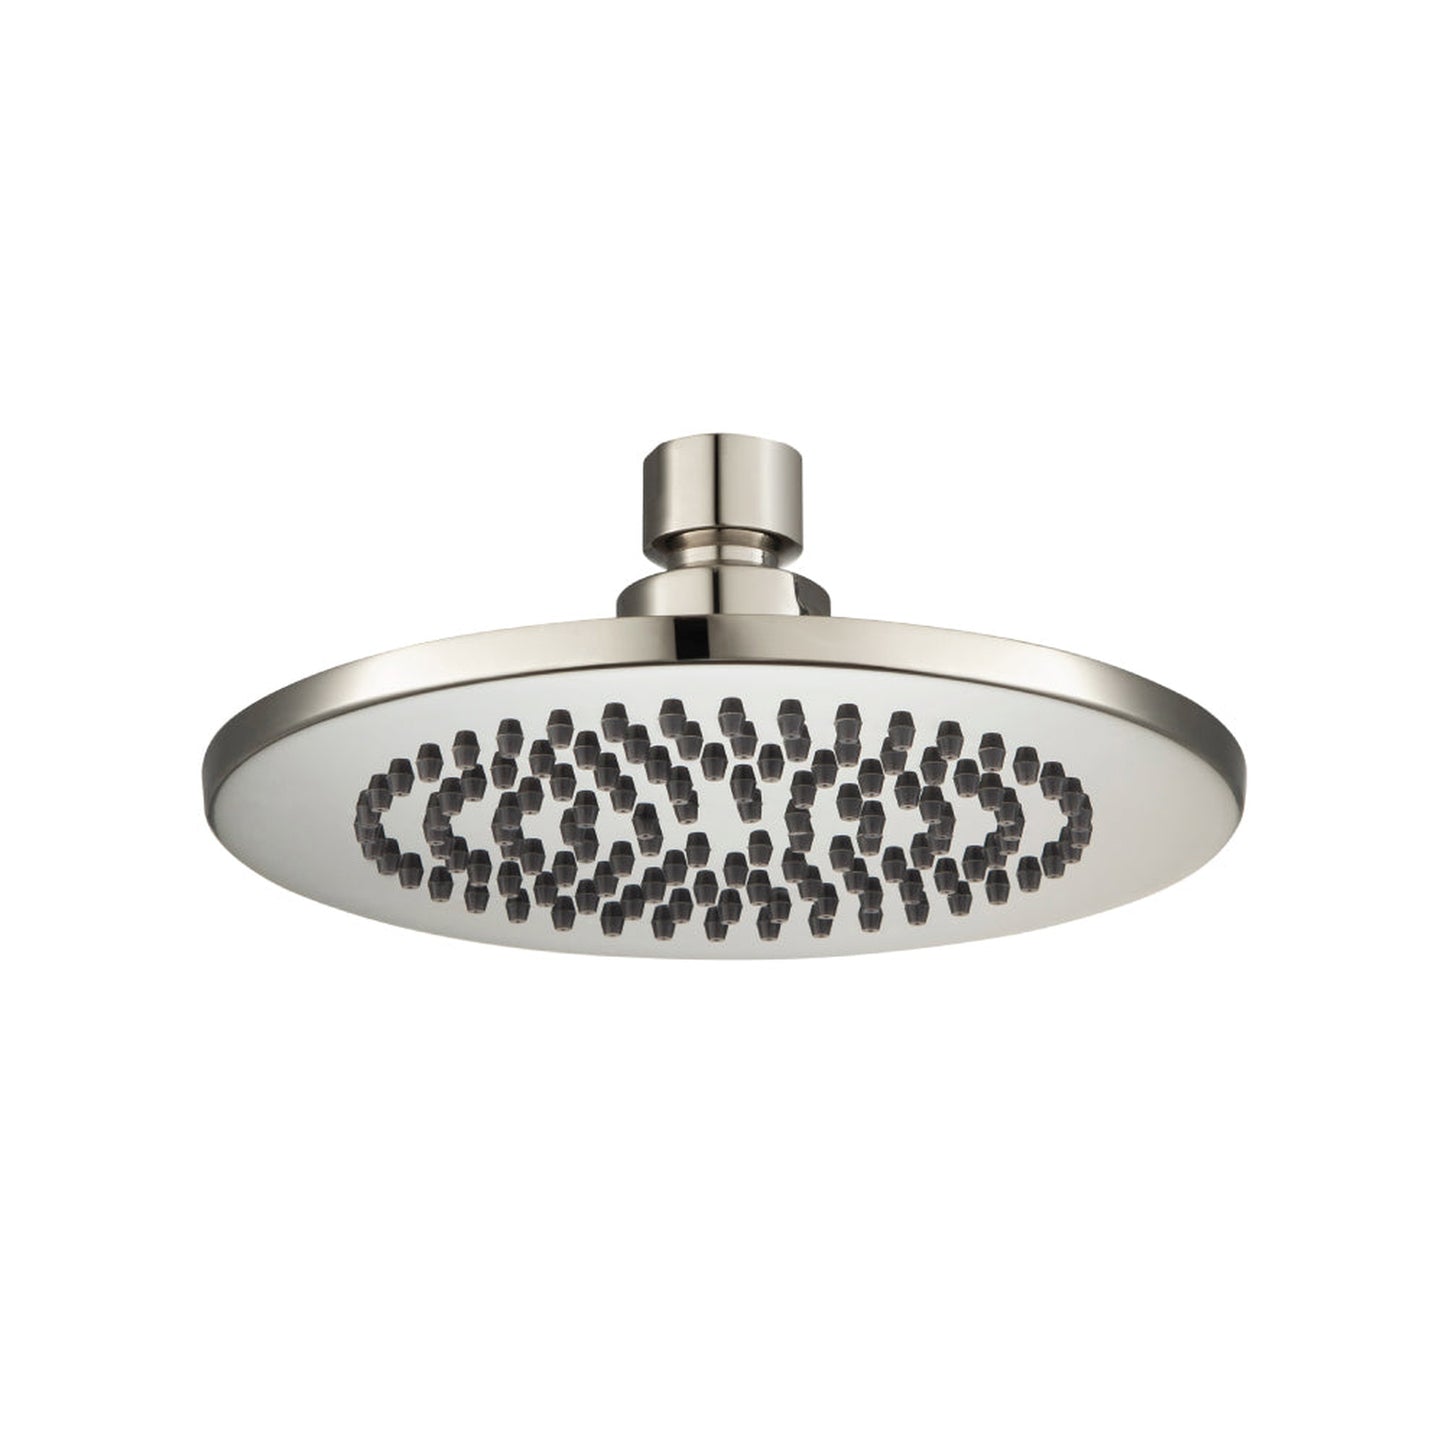 Isenberg Universal Fixtures 6" Single Function Round Polished Nickel PVD Solid Brass Rain Shower Head